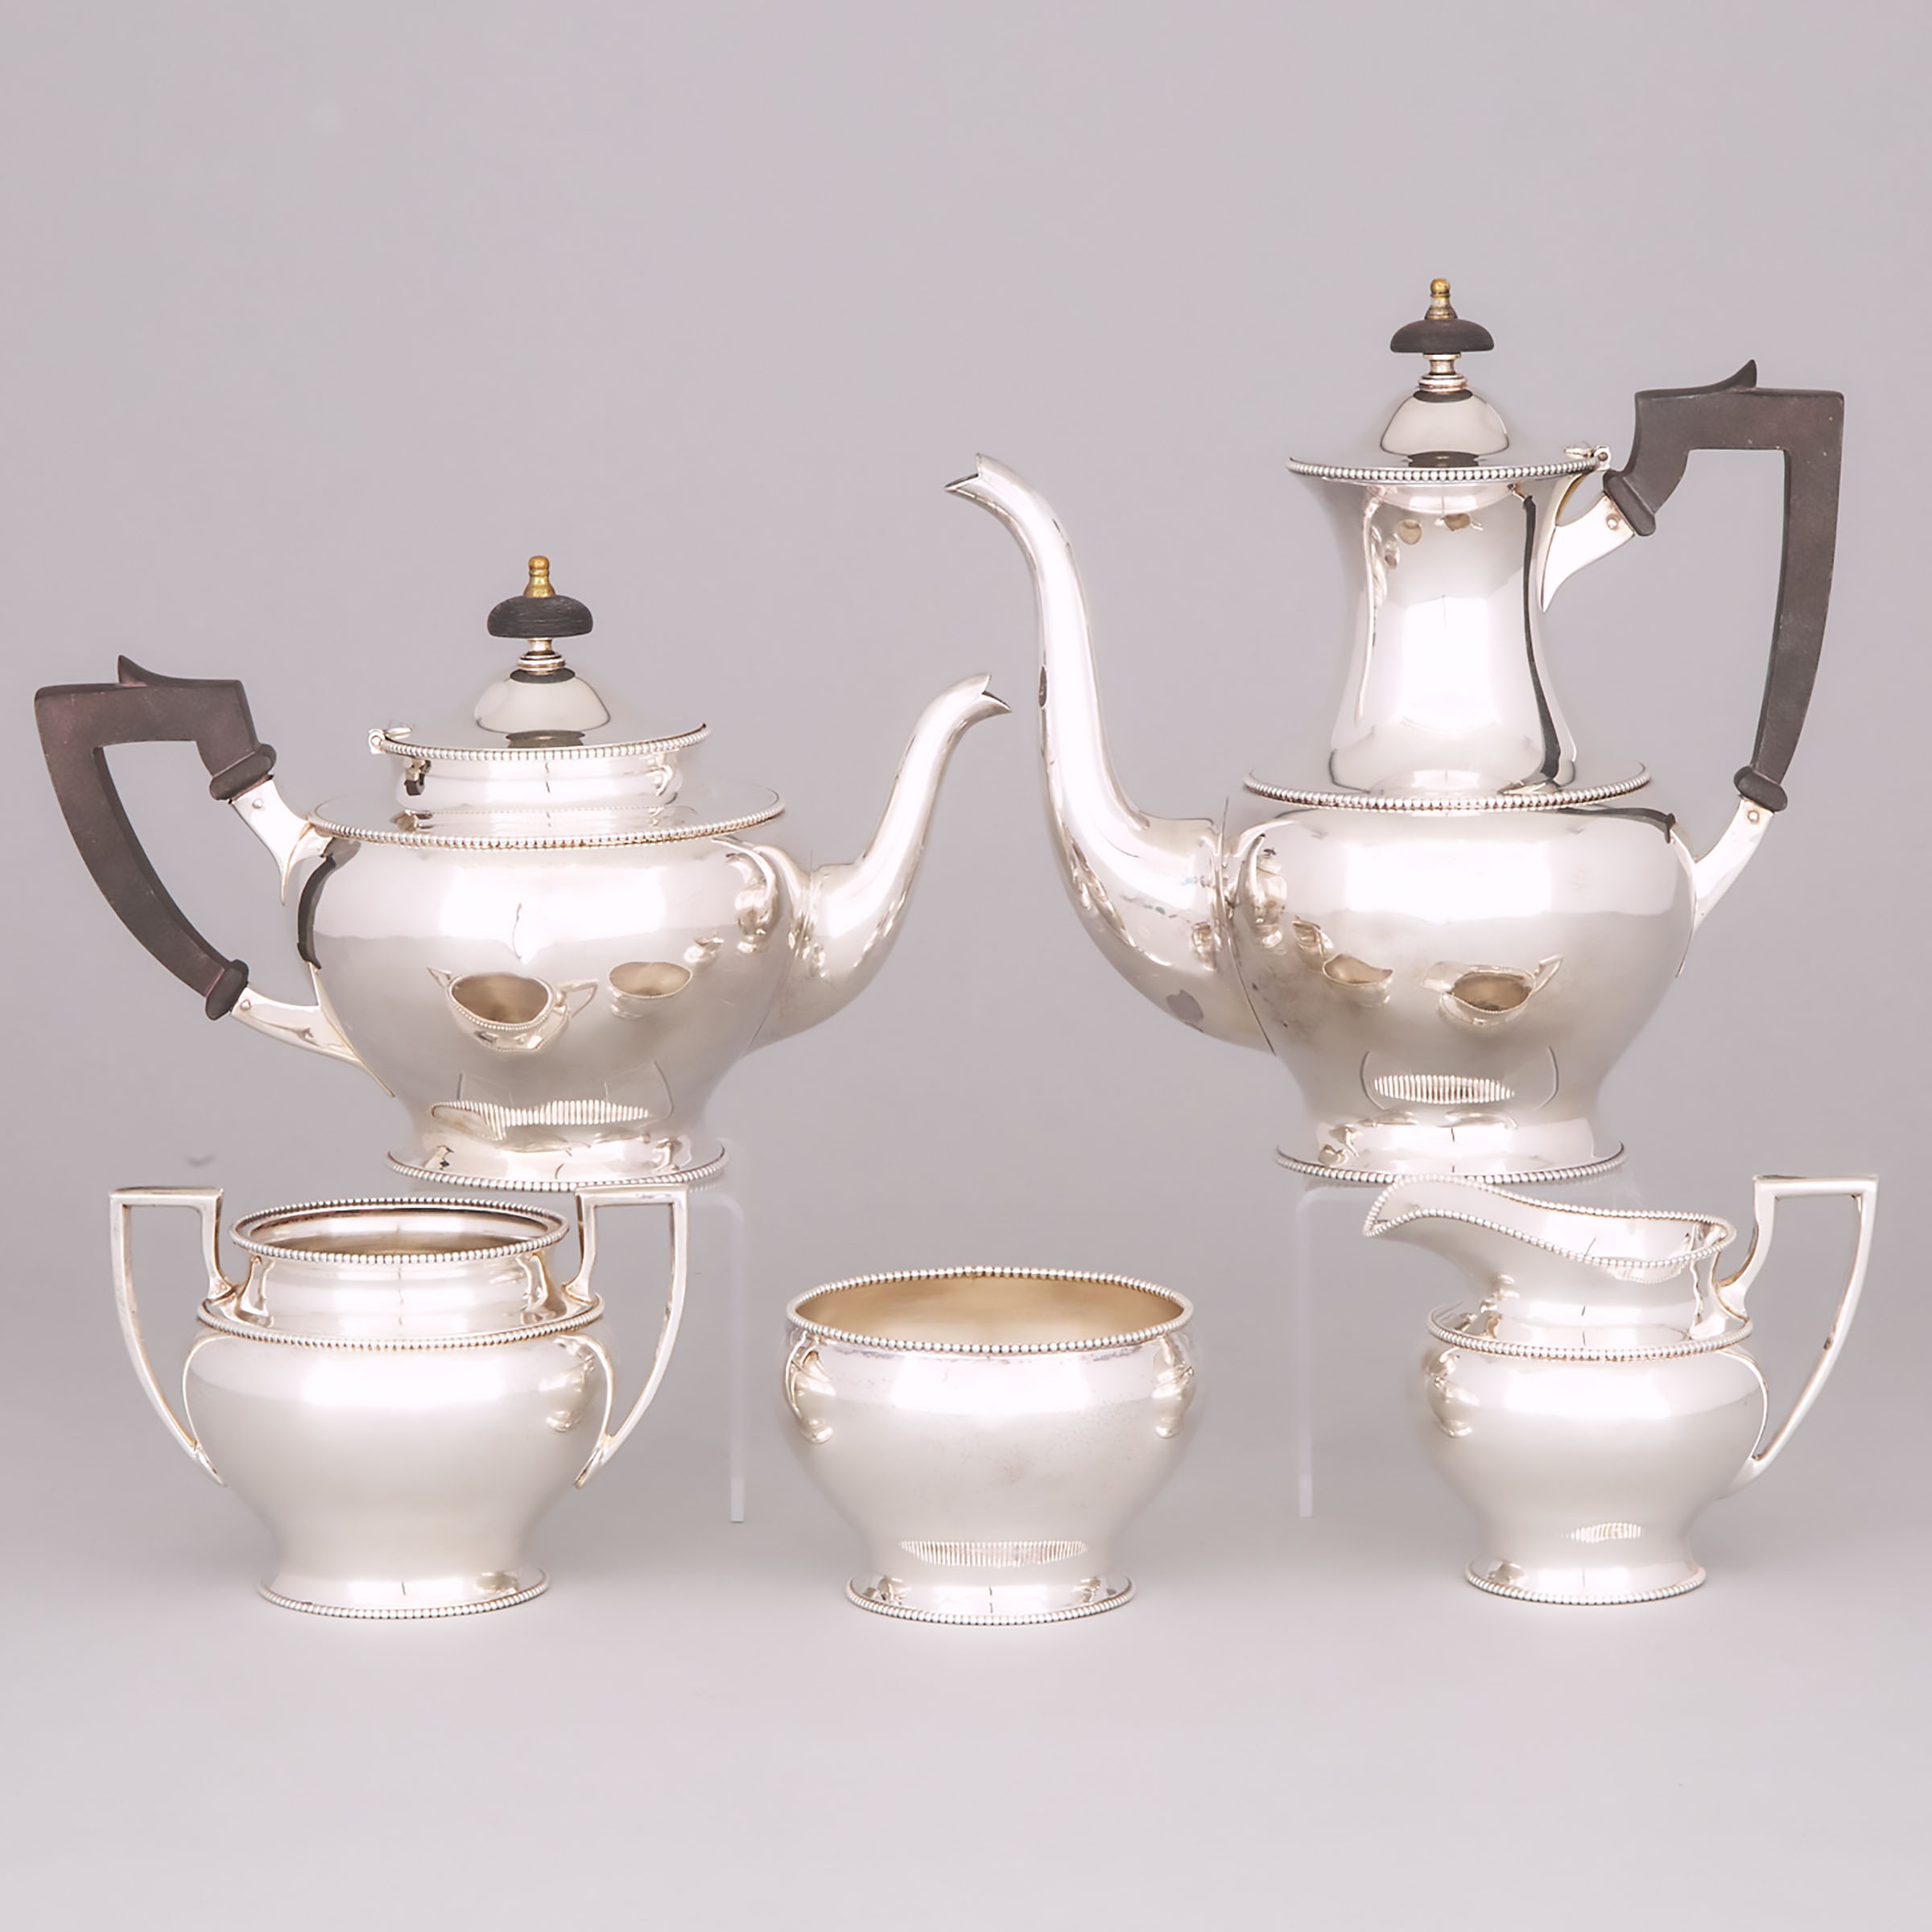 American Silver Tea and Coffee Service, R. Wallace & Sons, Wallingford, Ct., 20th century